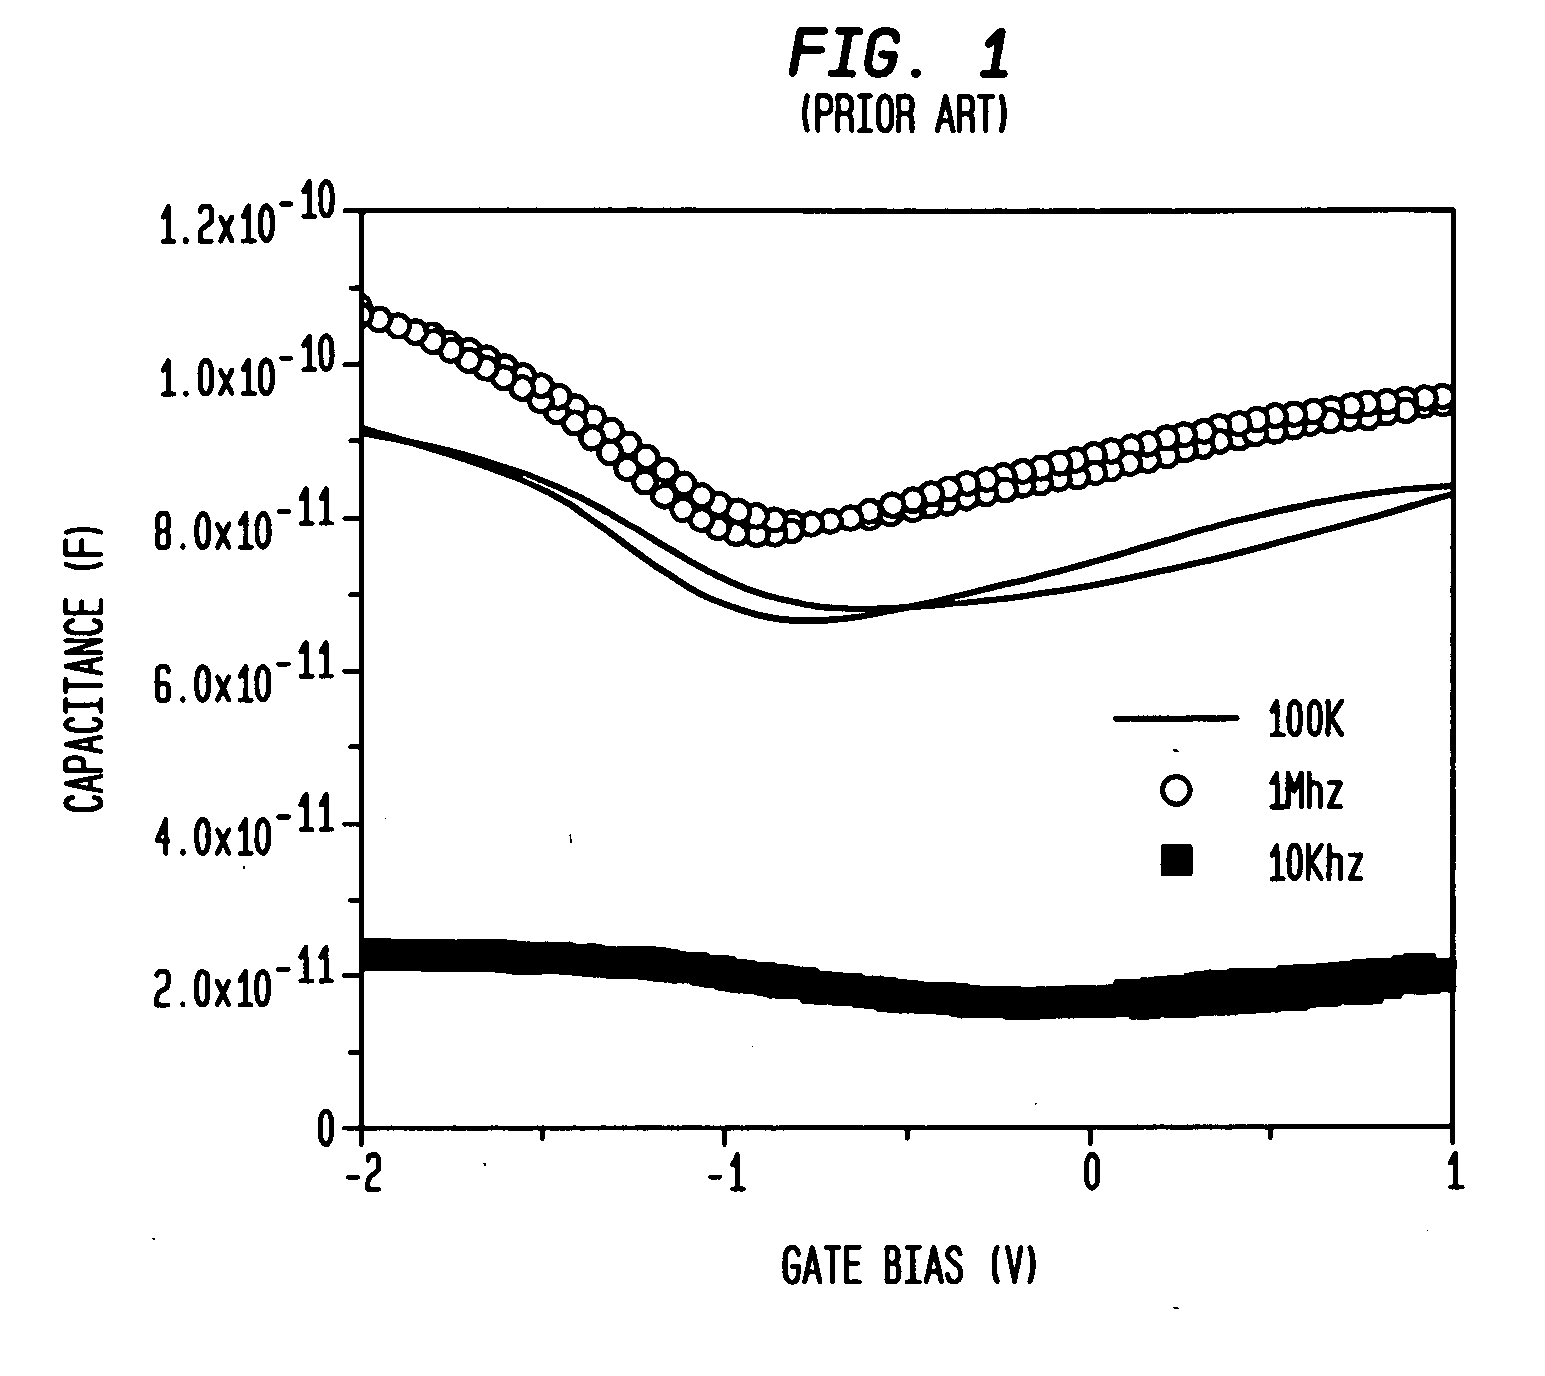 Ge-based semiconductor structure fabricated using a non-oxygen chalcogen passivation step